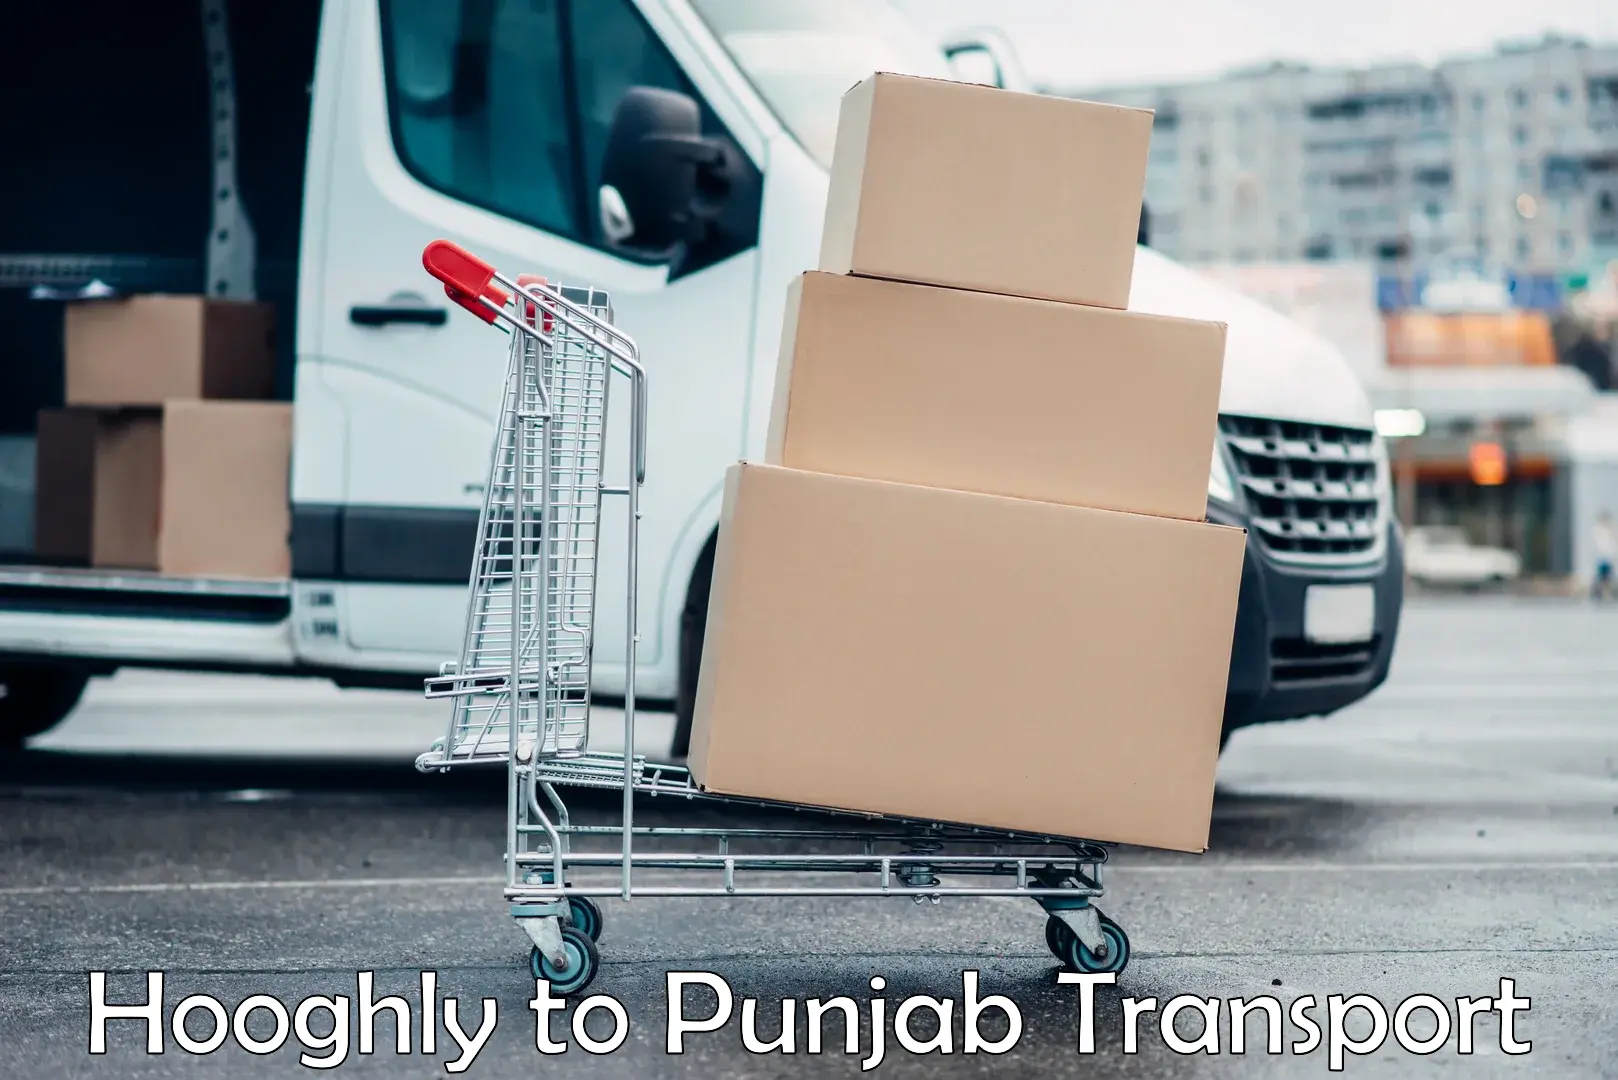 Daily transport service Hooghly to Patiala